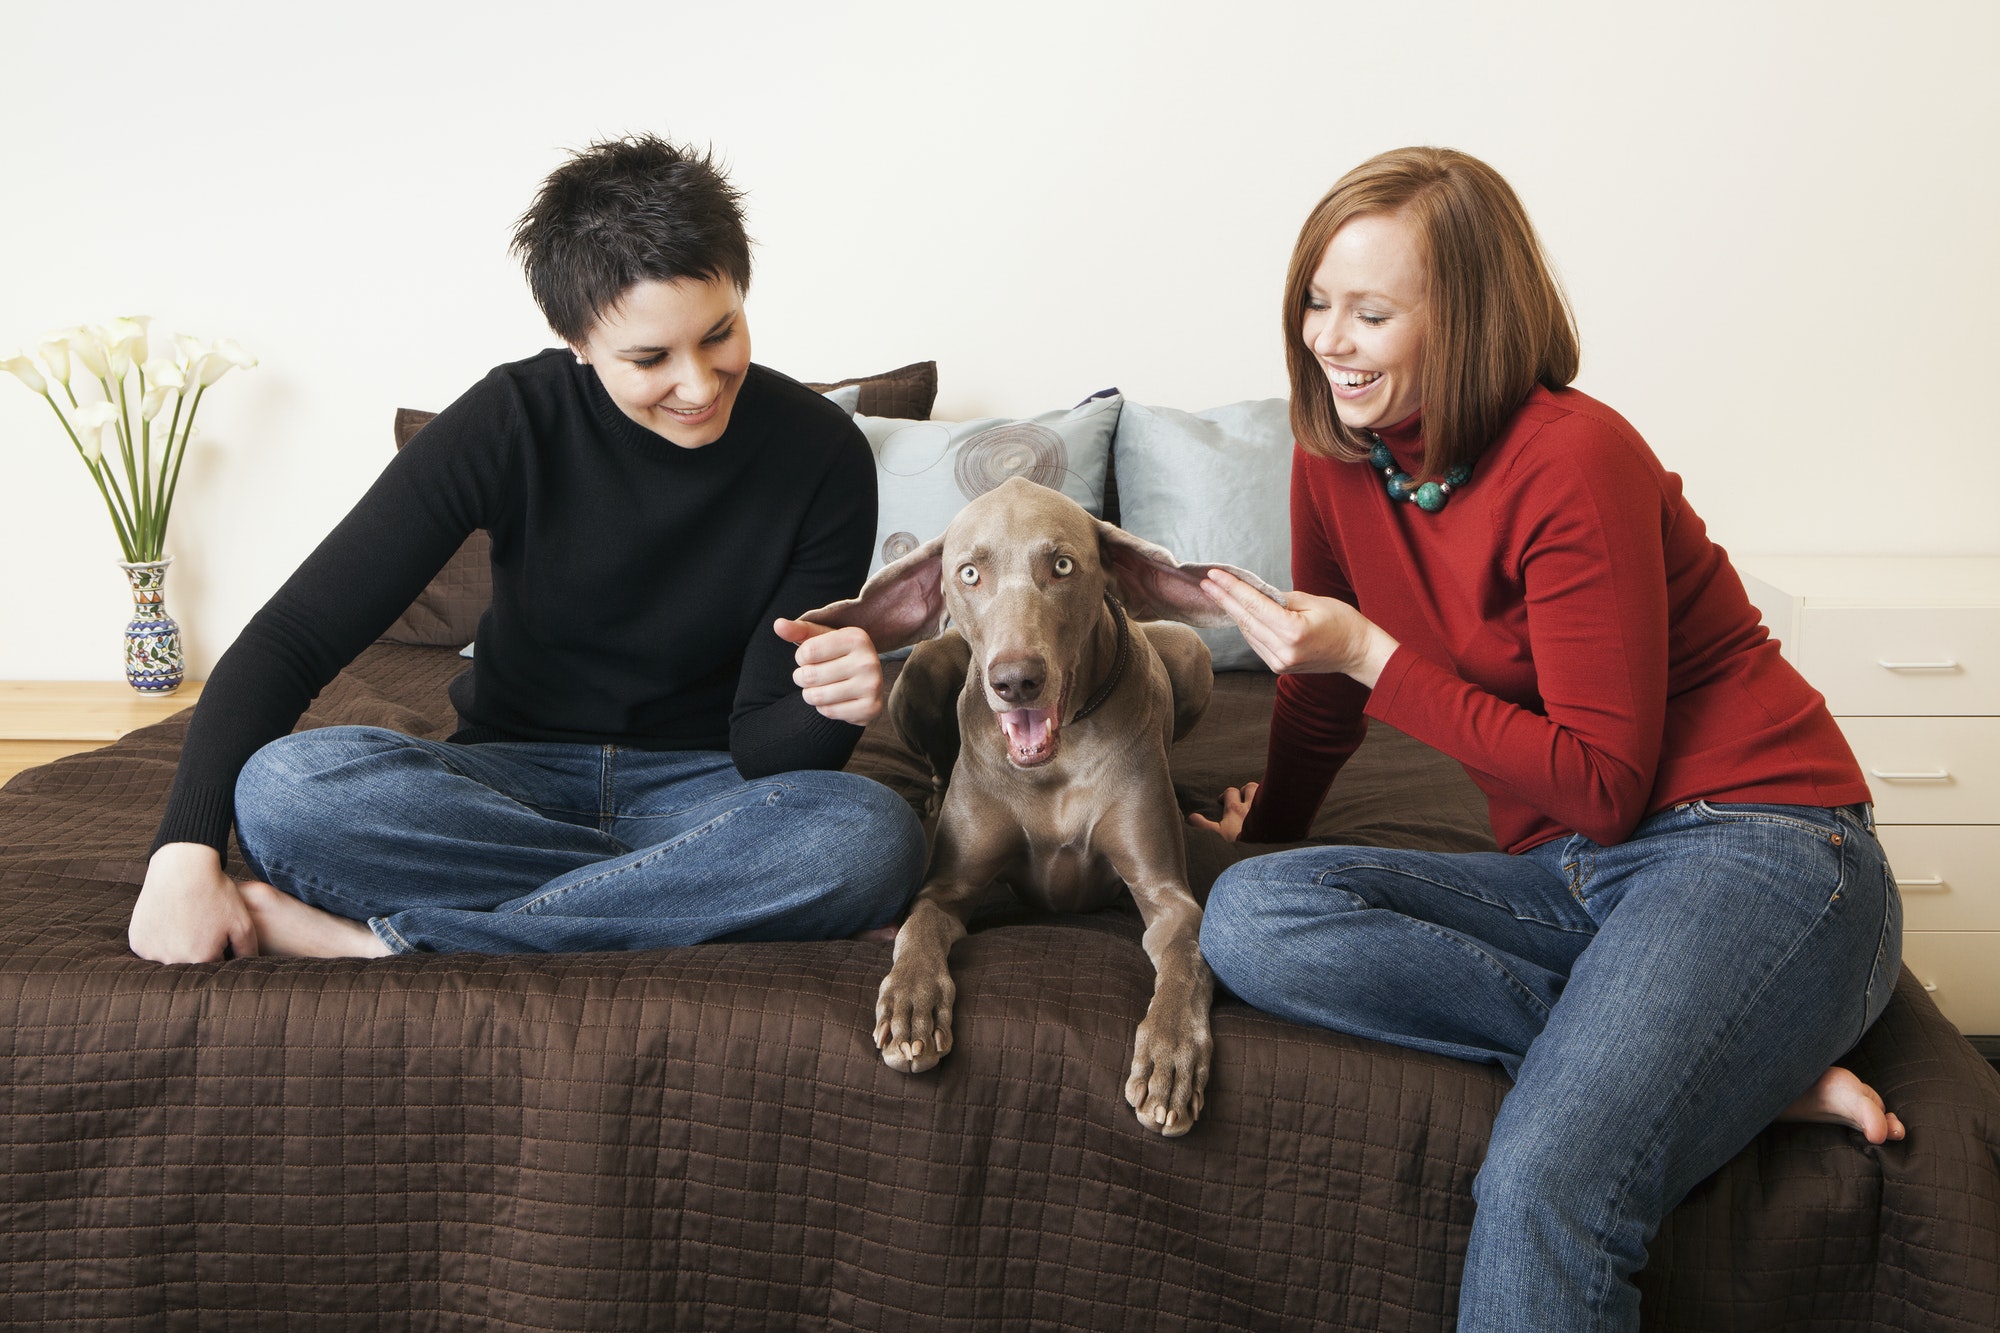 A same sex couple, two women posing with their weimeranar pedigree dog between them.